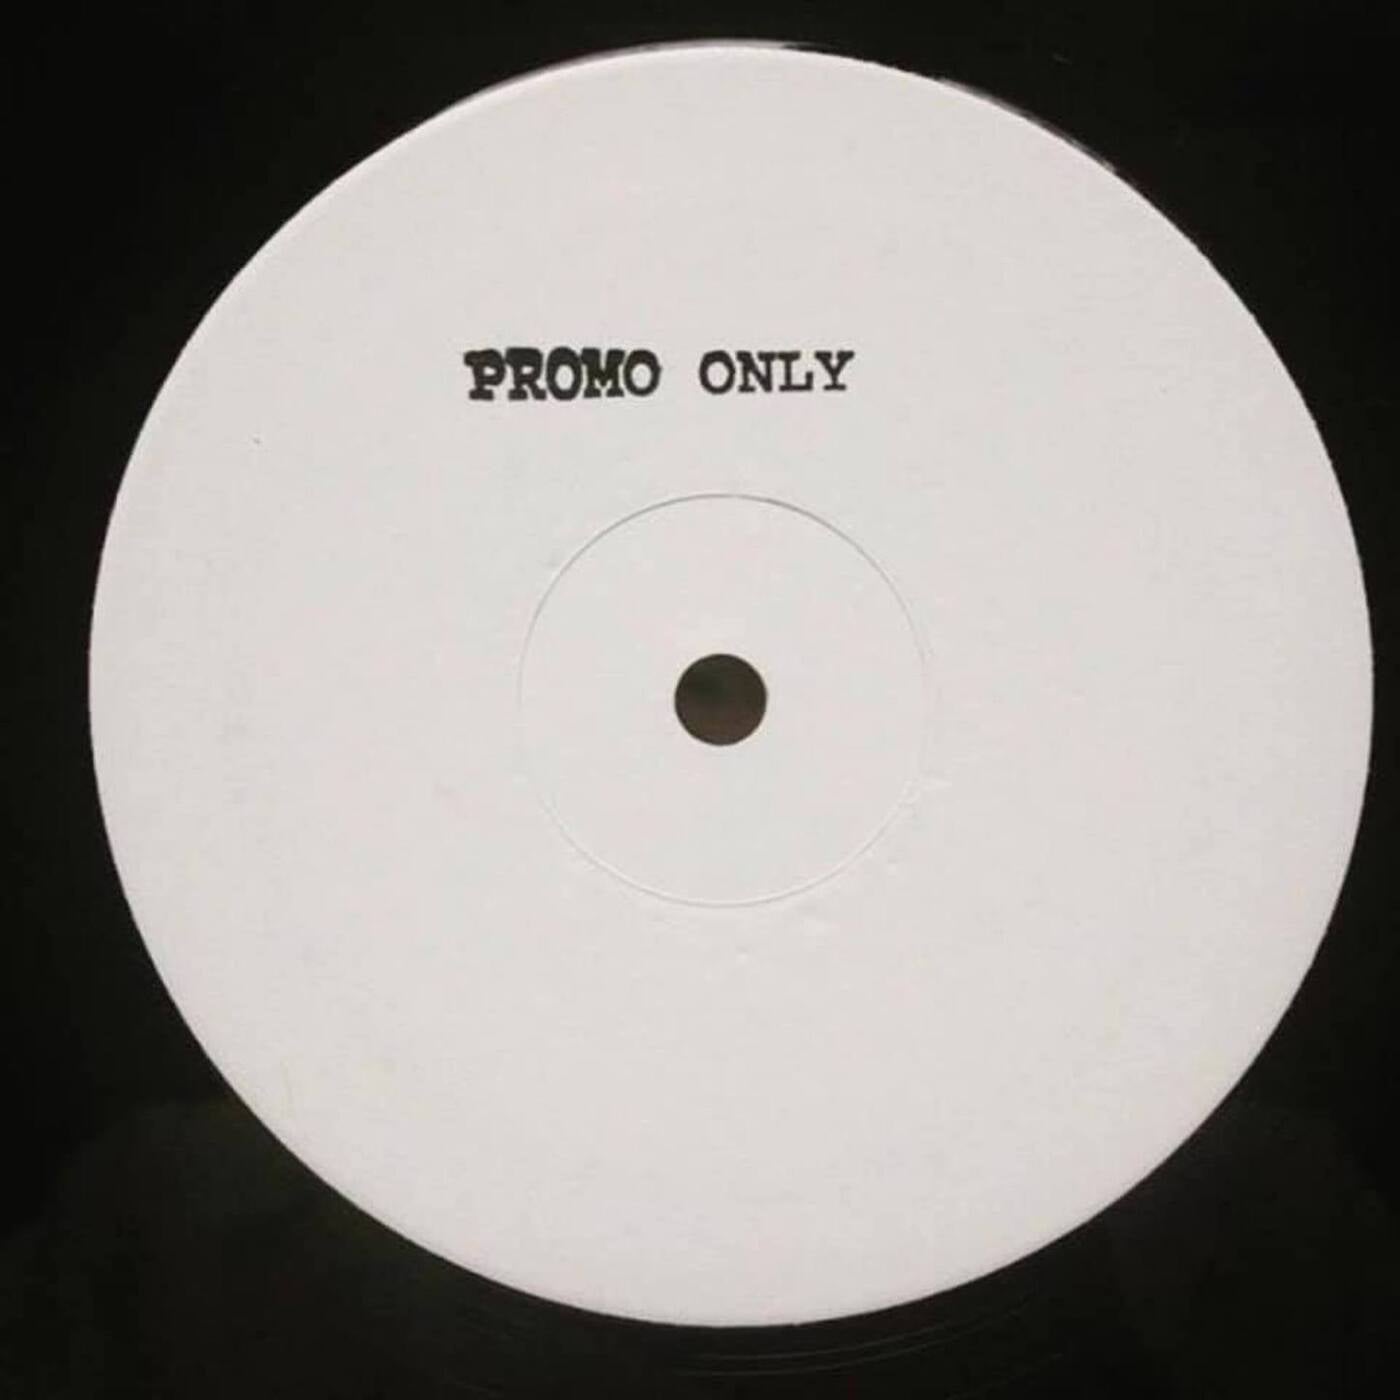 Promo Only – Promo Only [JJ065]